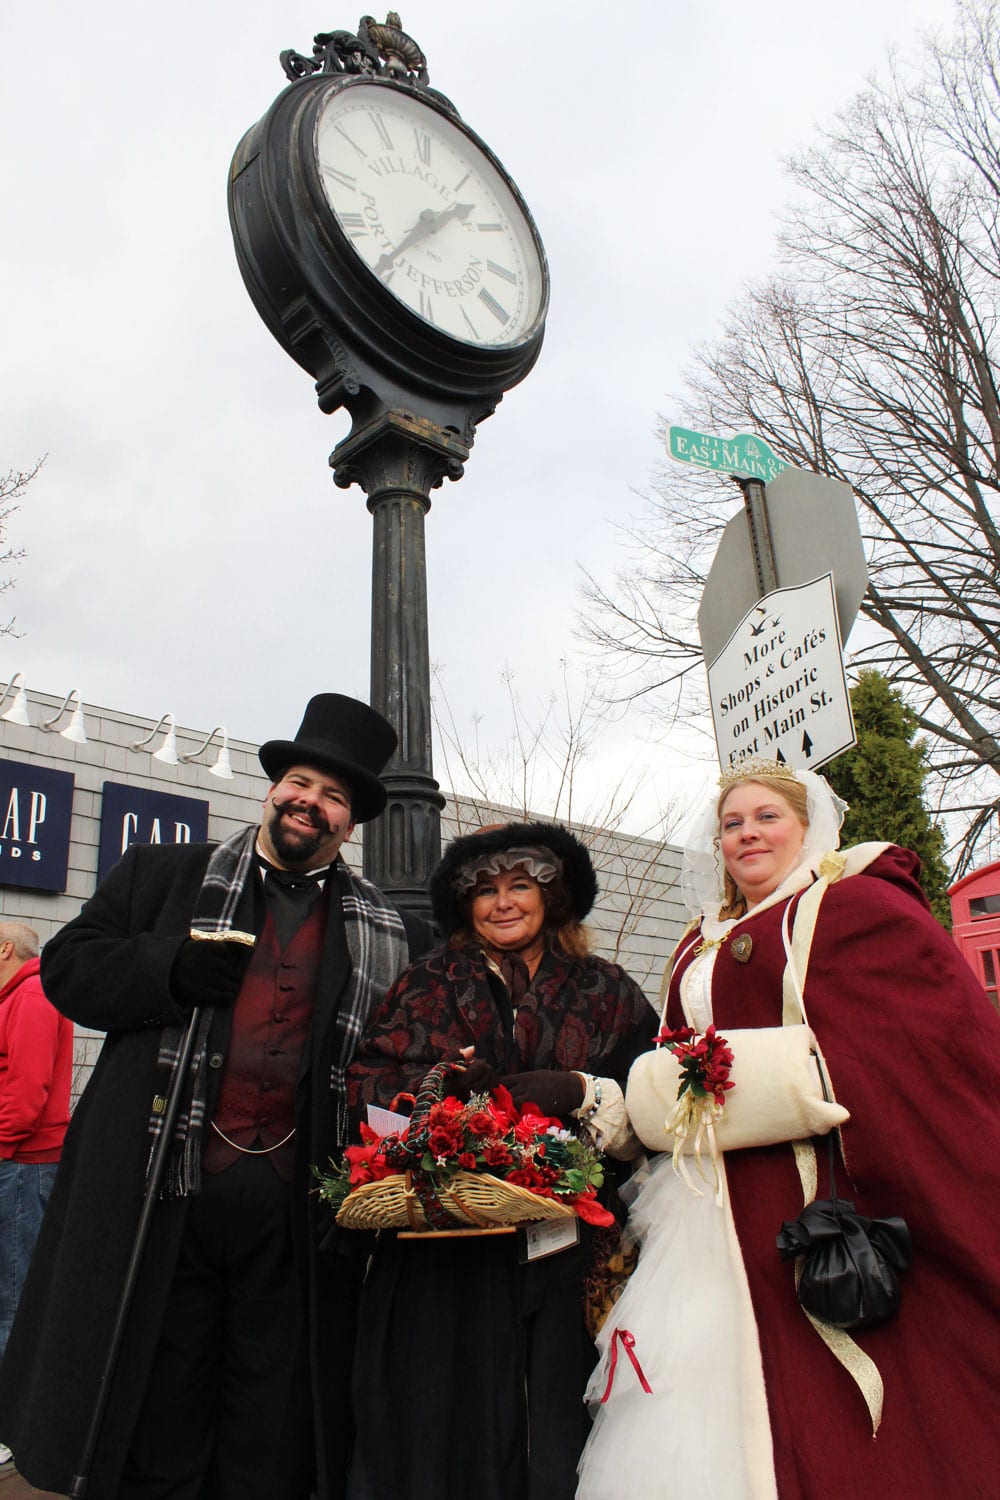 Dickens Festival comes to Port Jefferson for 20th year TBR News Media